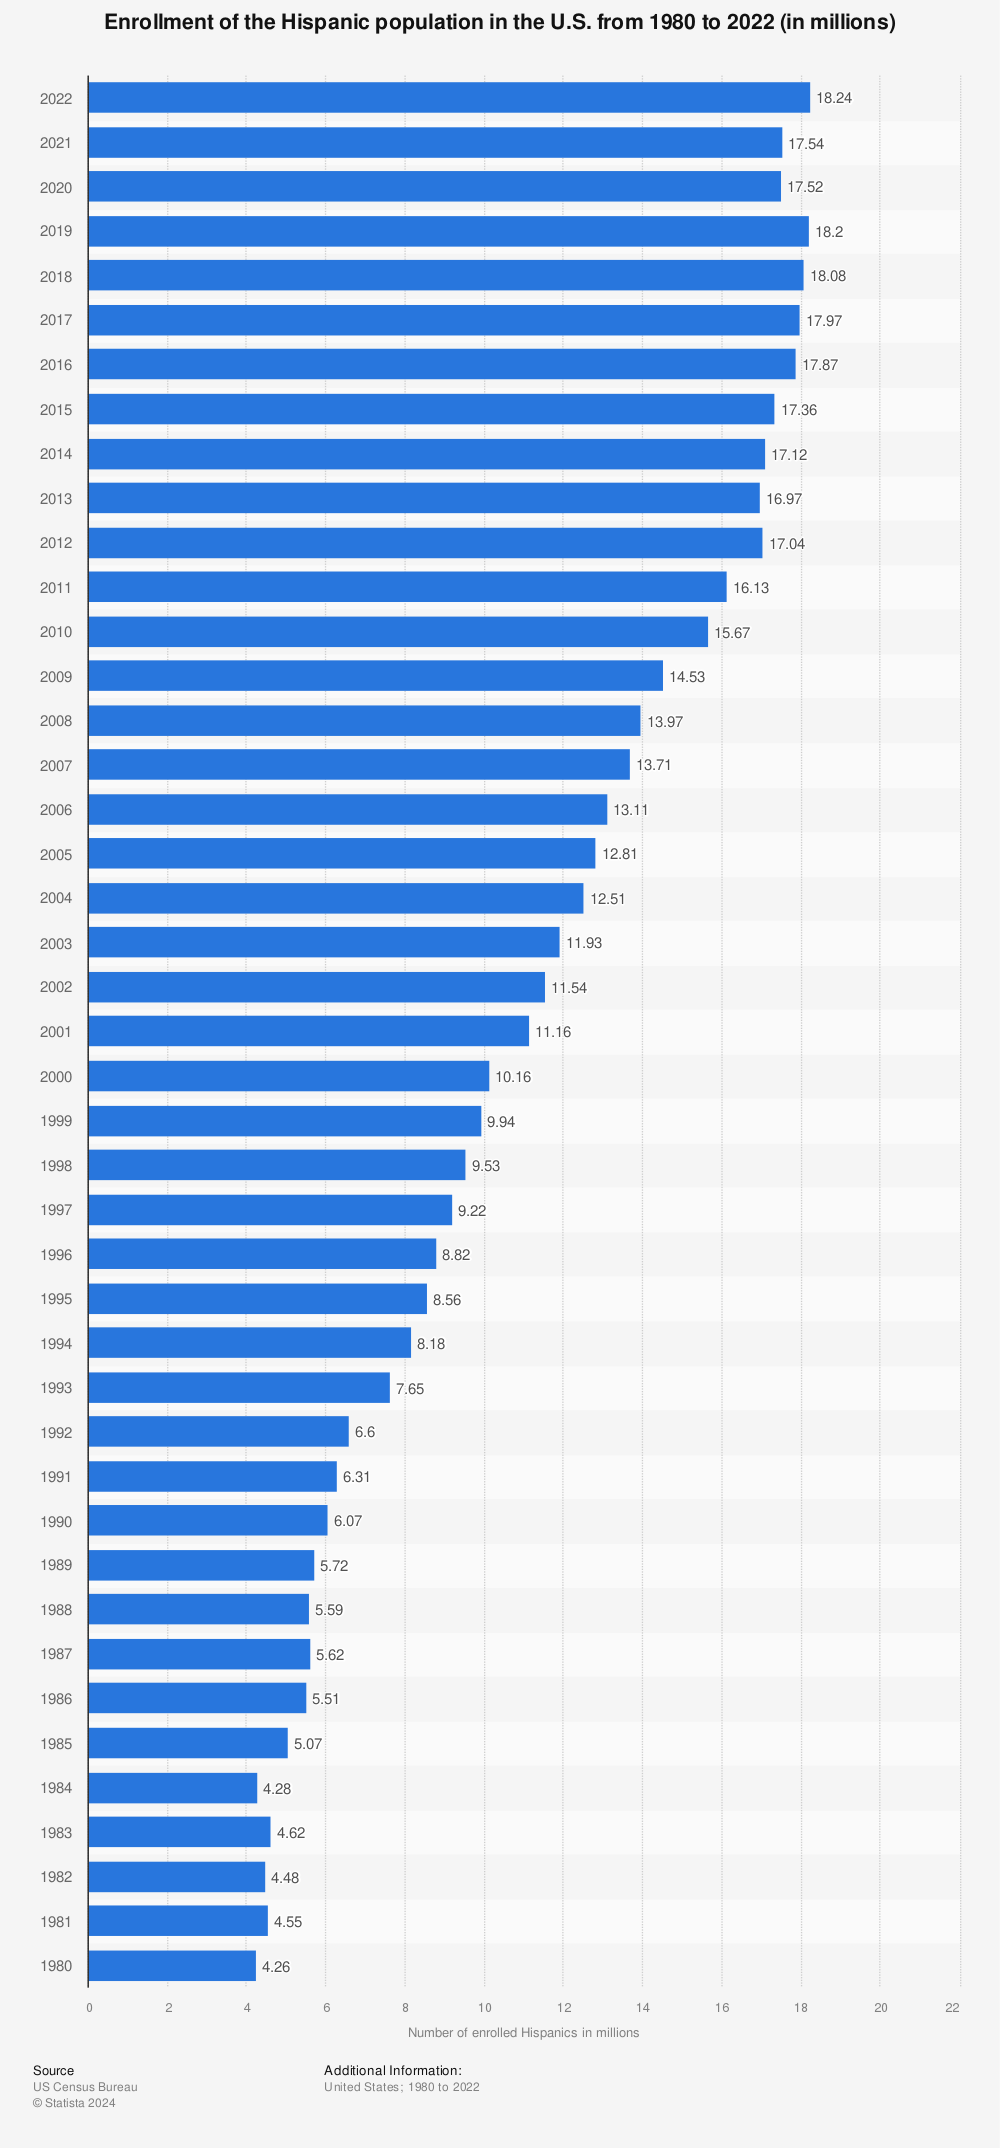 Statistic: Enrollment of the Hispanic population in the U.S. from 1980 to 2019 (in millions) | Statista